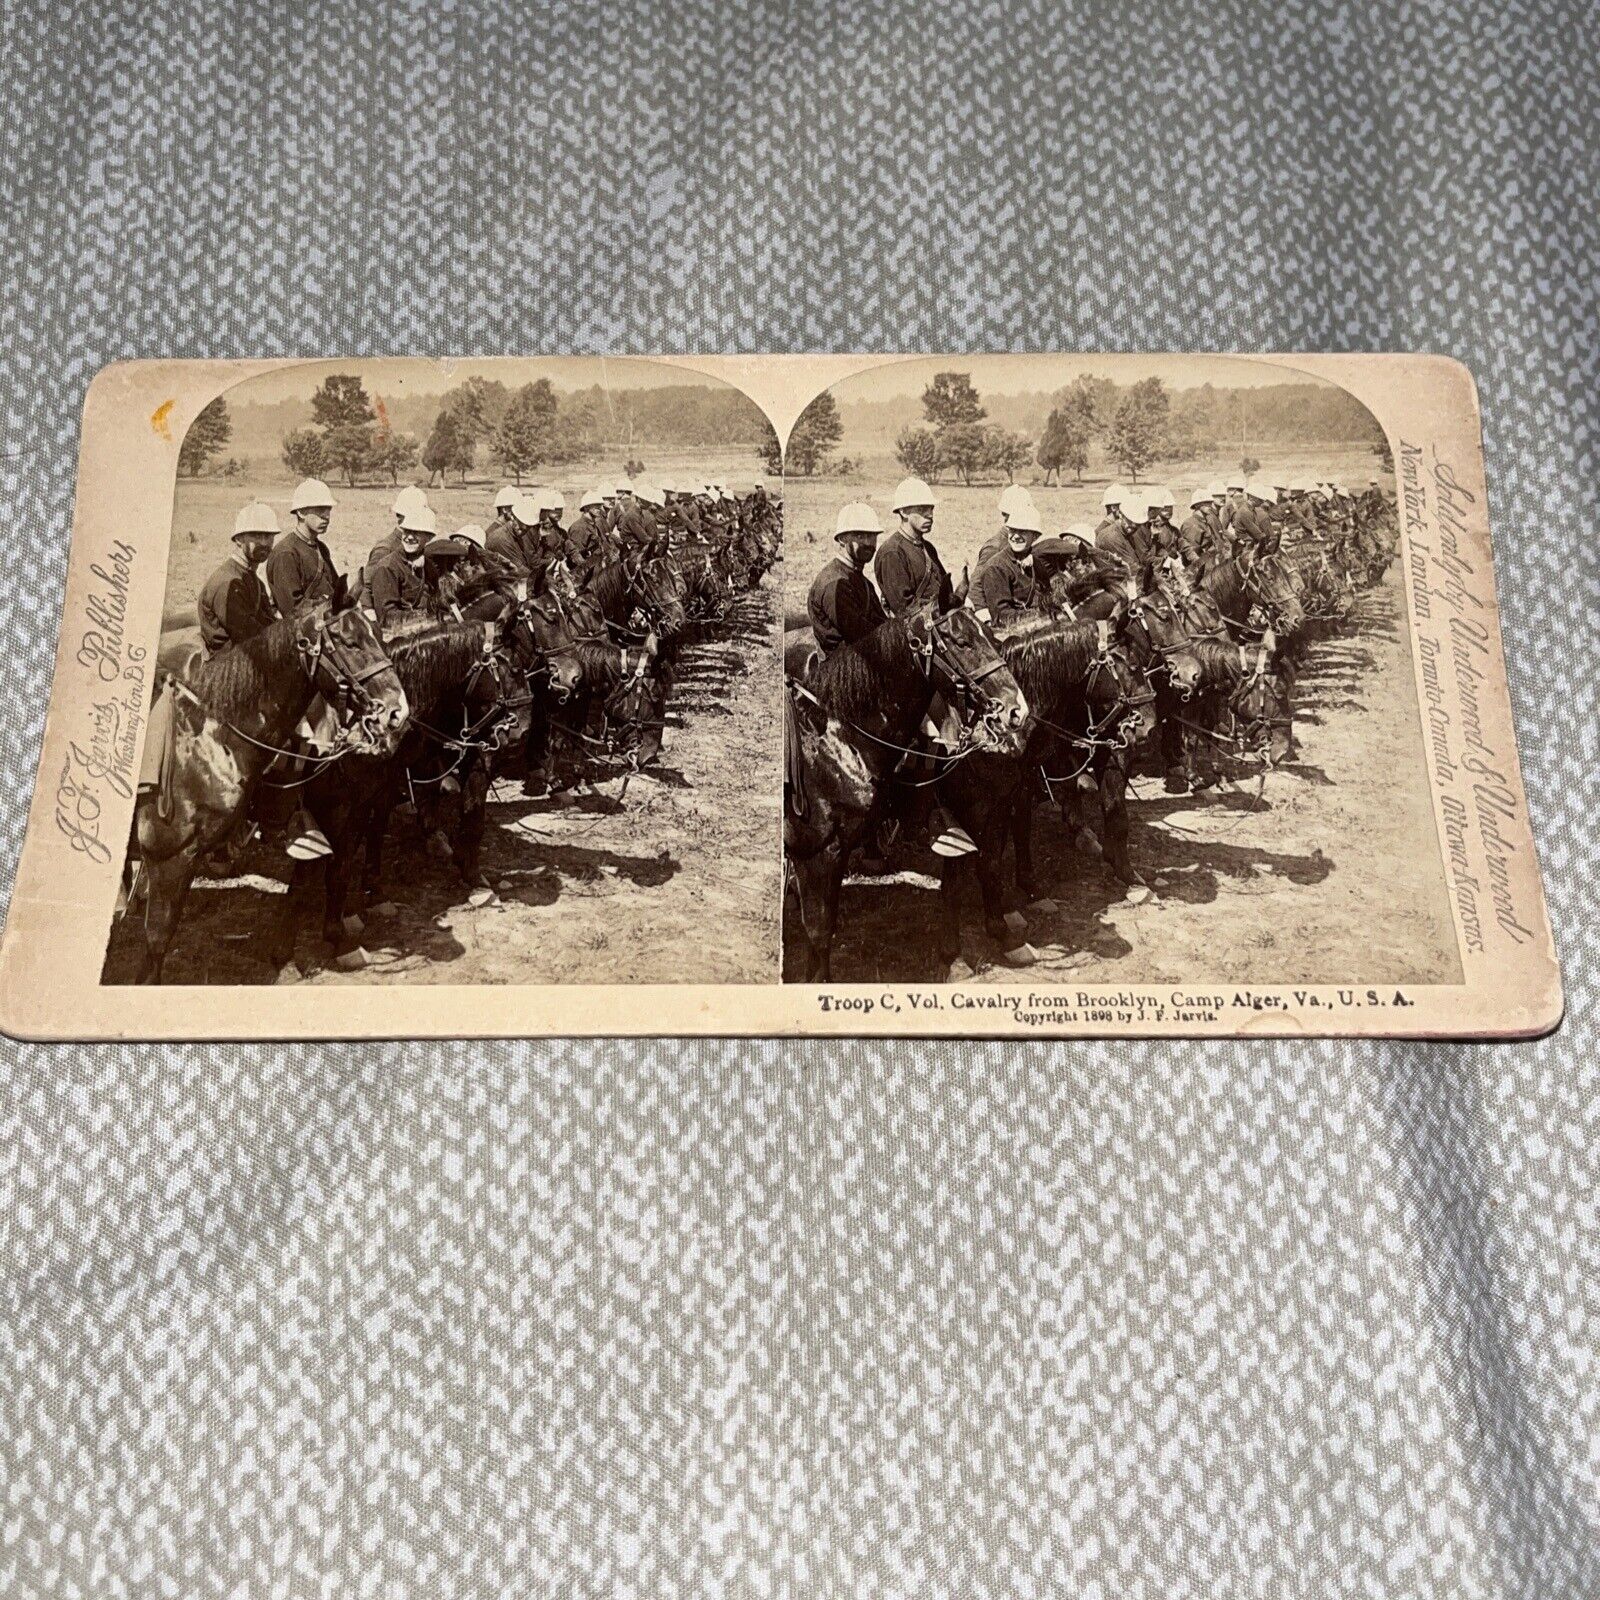 Antique 1898 Stereoview Photo: Troop C Cavalry from Brooklyn Camp Alger VA